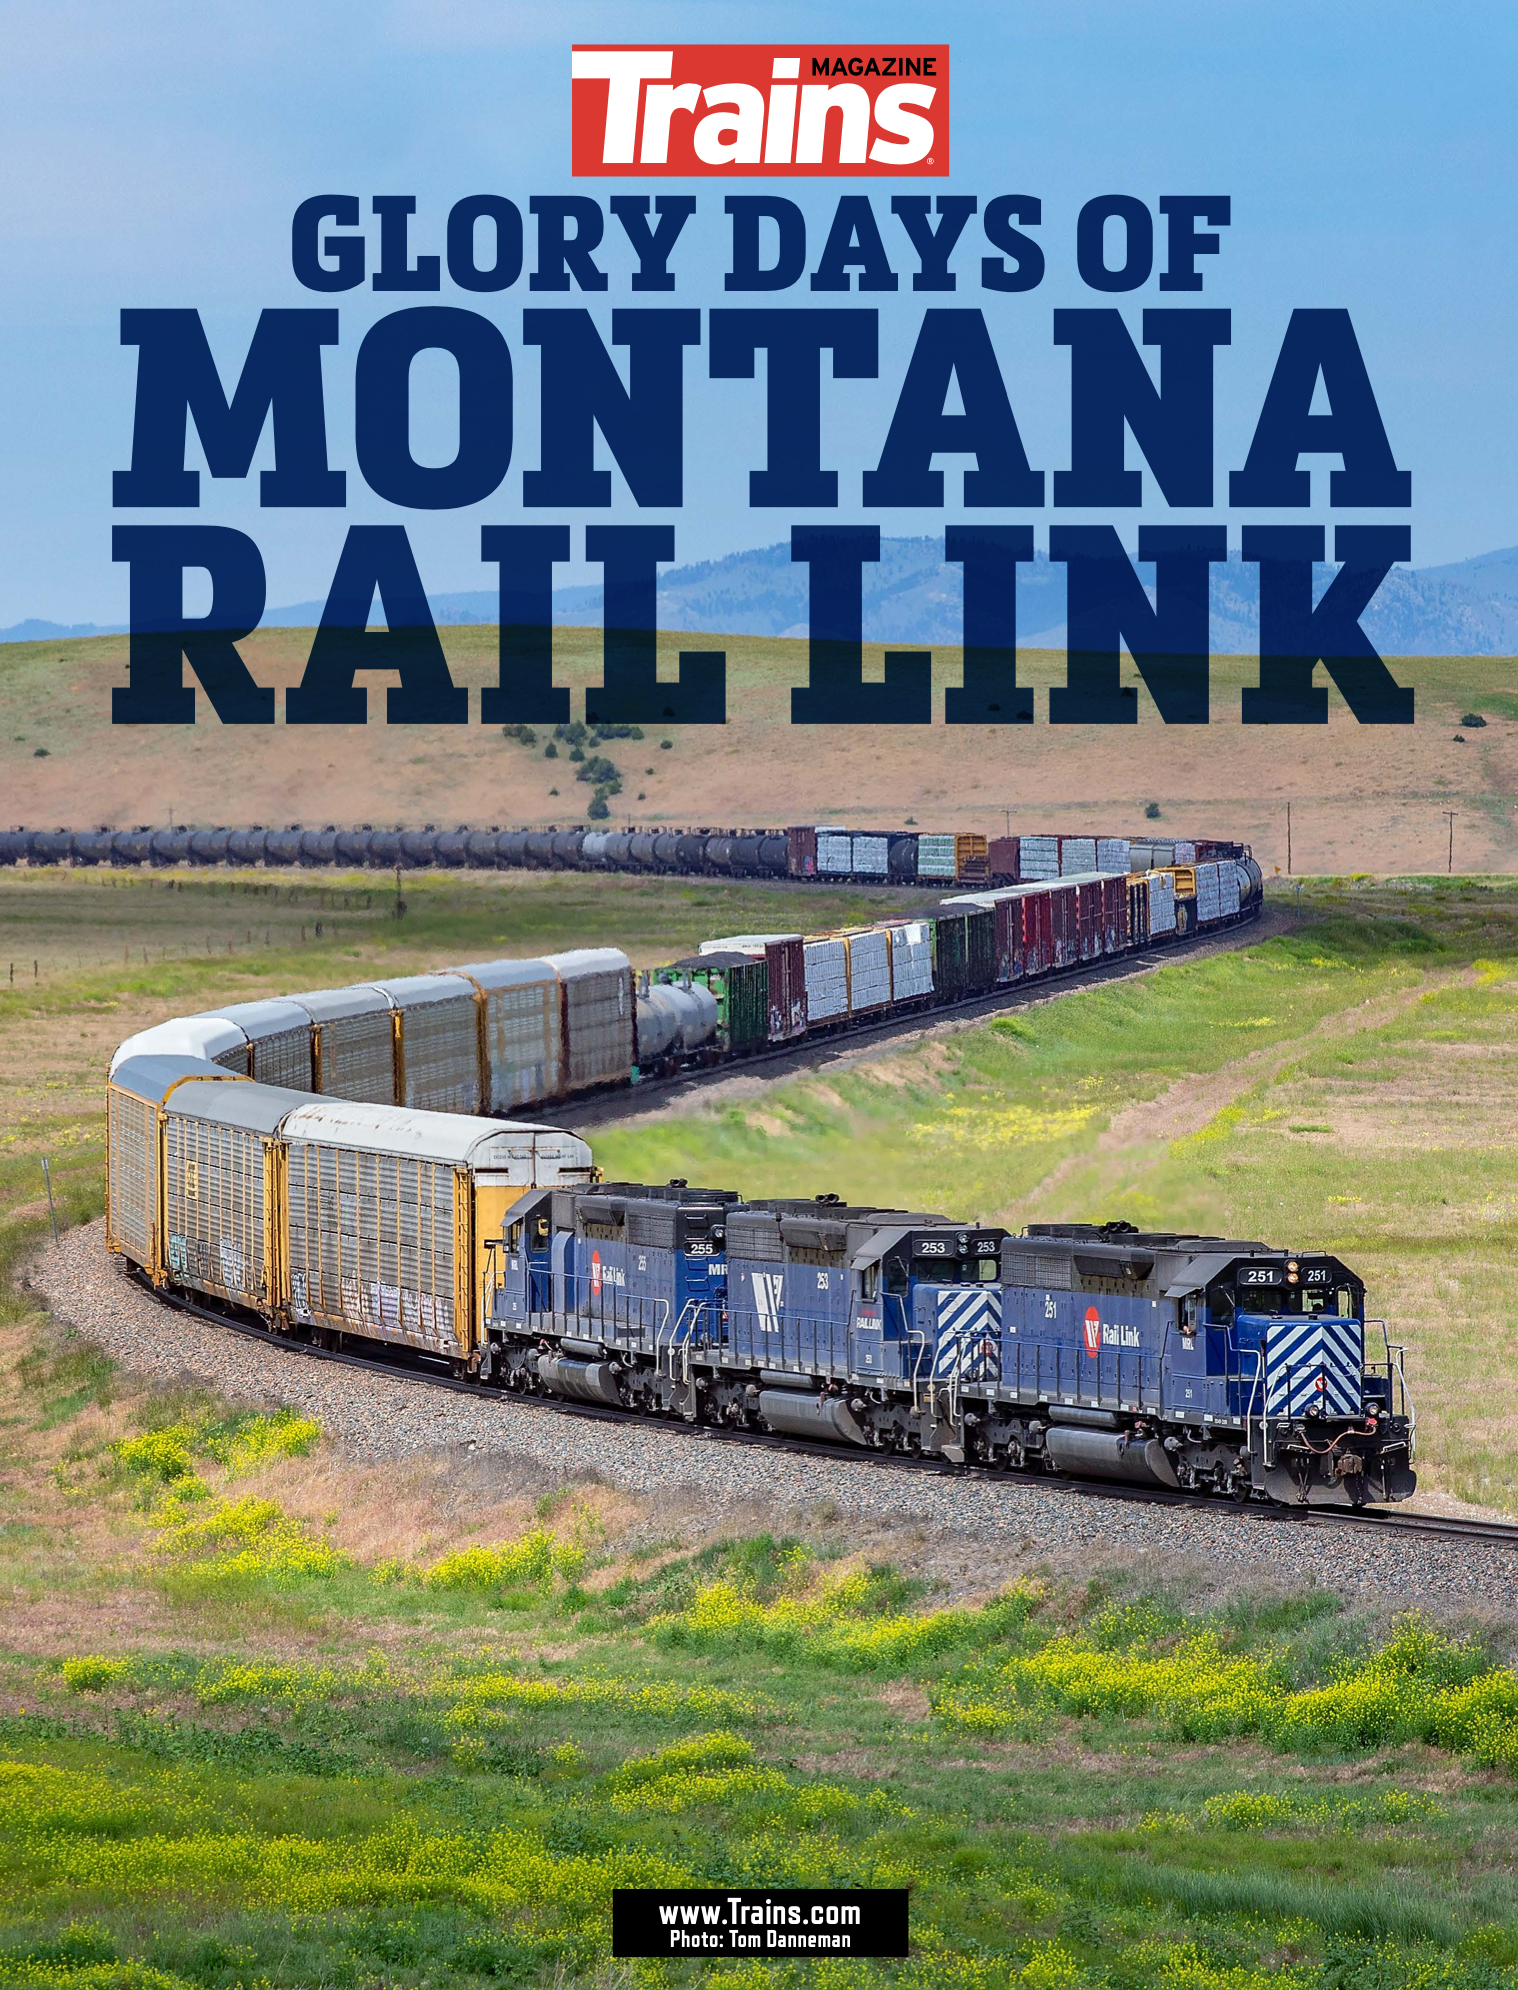 Cover of PDF: MRL locomotives lead a train through an S curve under blue skies in a flat area.